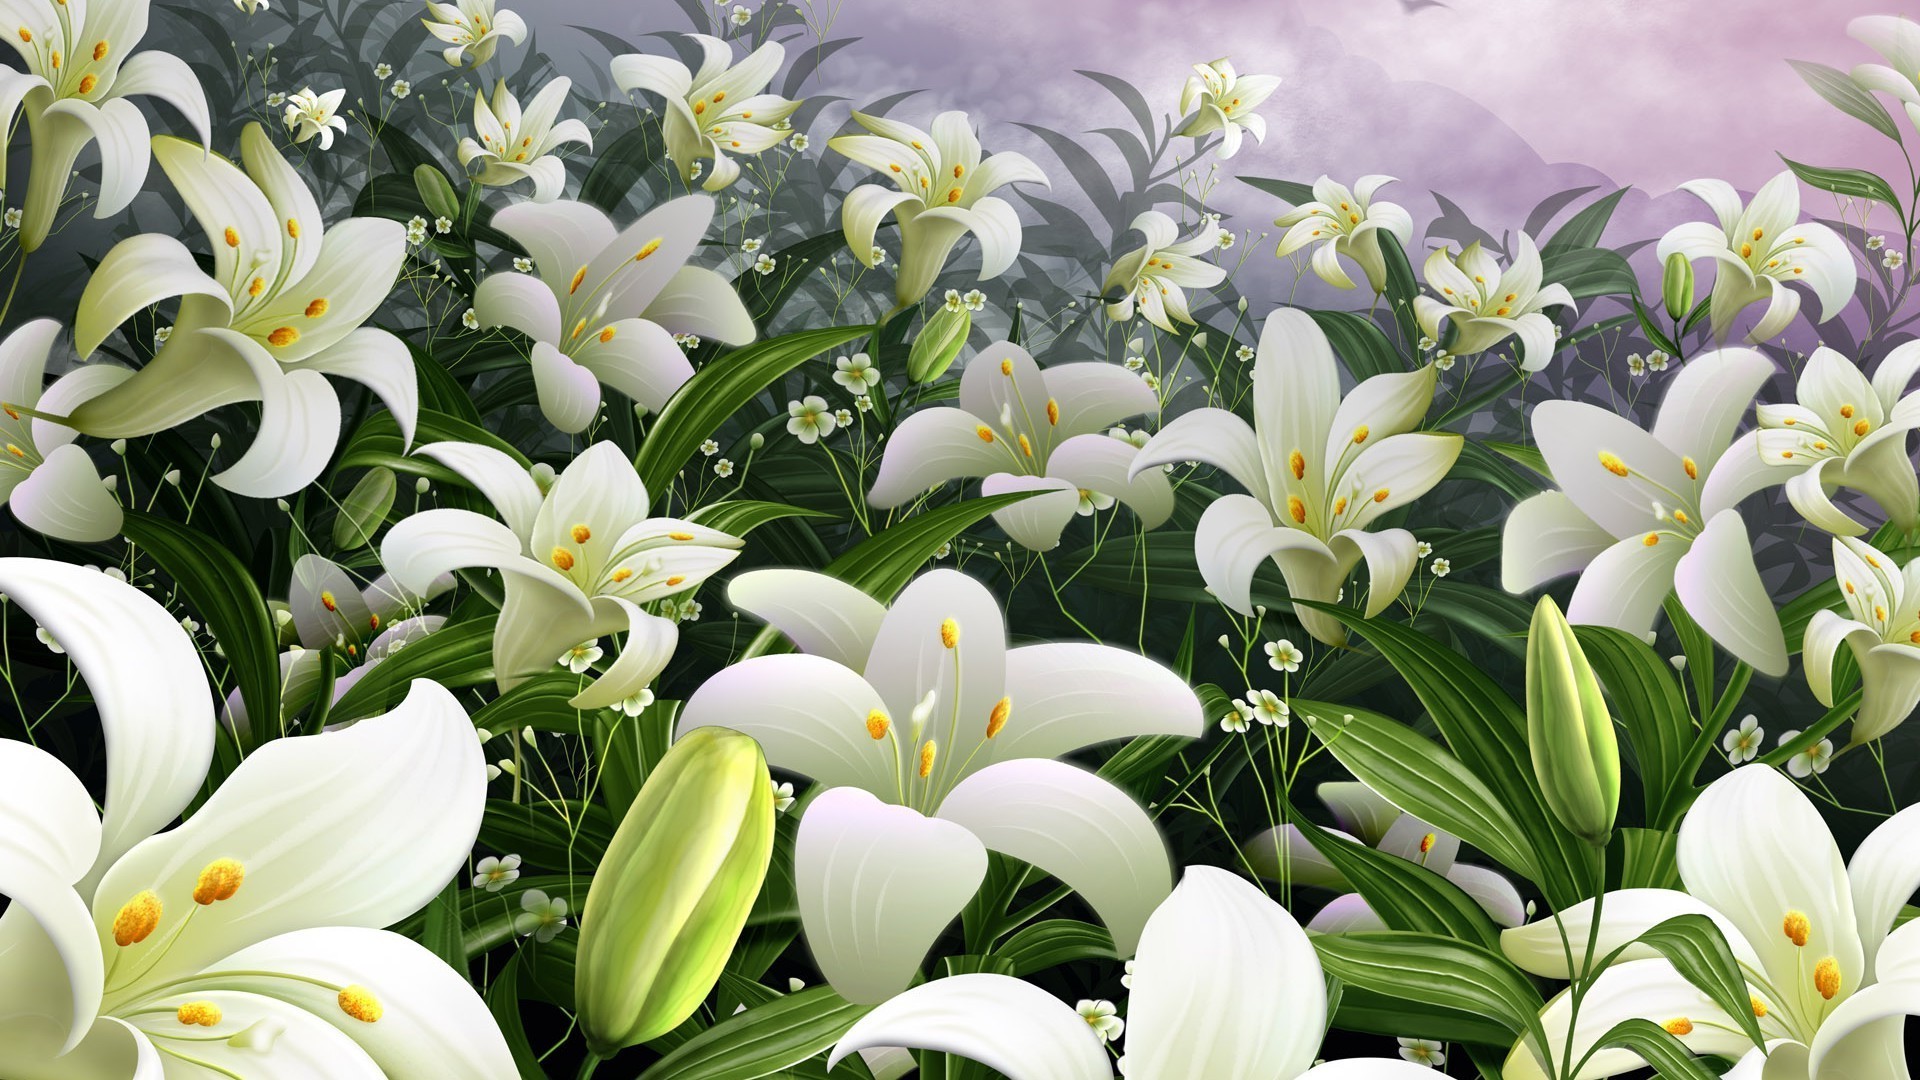 lily flower nature garden flora floral petal blooming leaf summer bouquet beautiful easter bright season color